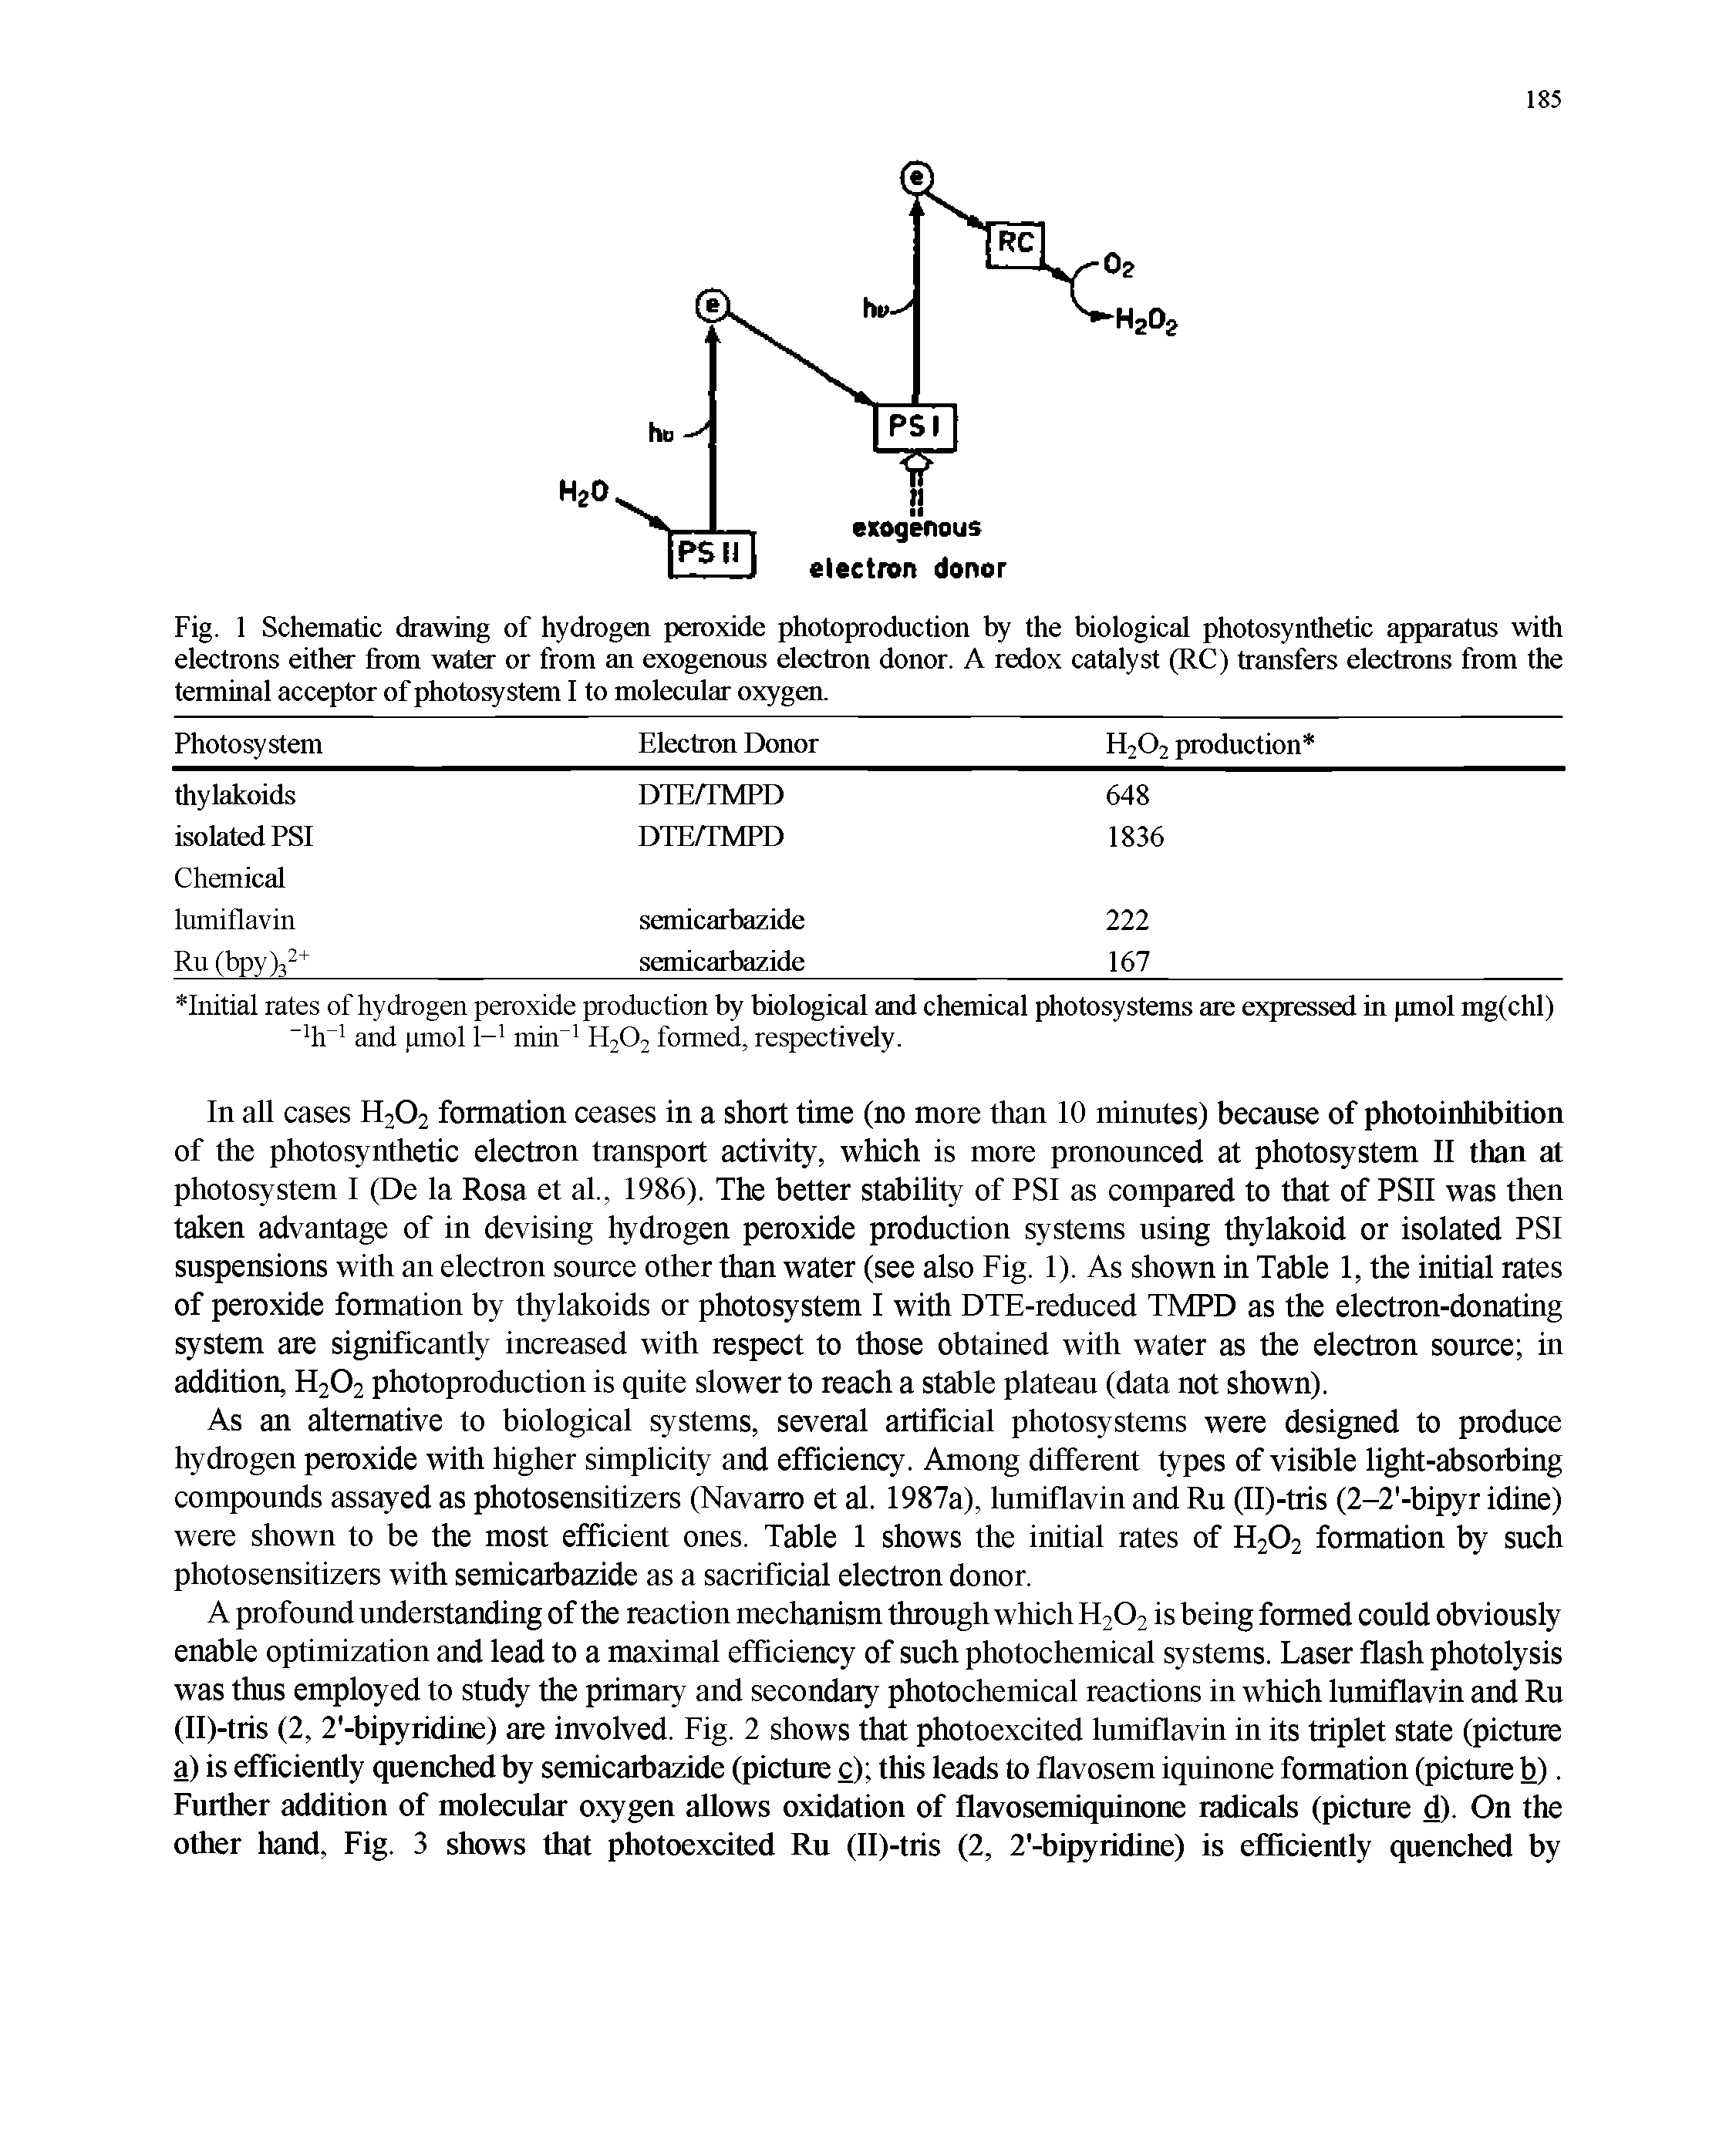 Fig. 1 Schematic drawing of hydrogen peroxide photoproduction by the biological photosynthetic apparatus with electrons either from water or from an exogenous electron donor. A redox catalyst (RC) transfers electrons from the terminal acceptor of photosystem I to molecular oxygen.